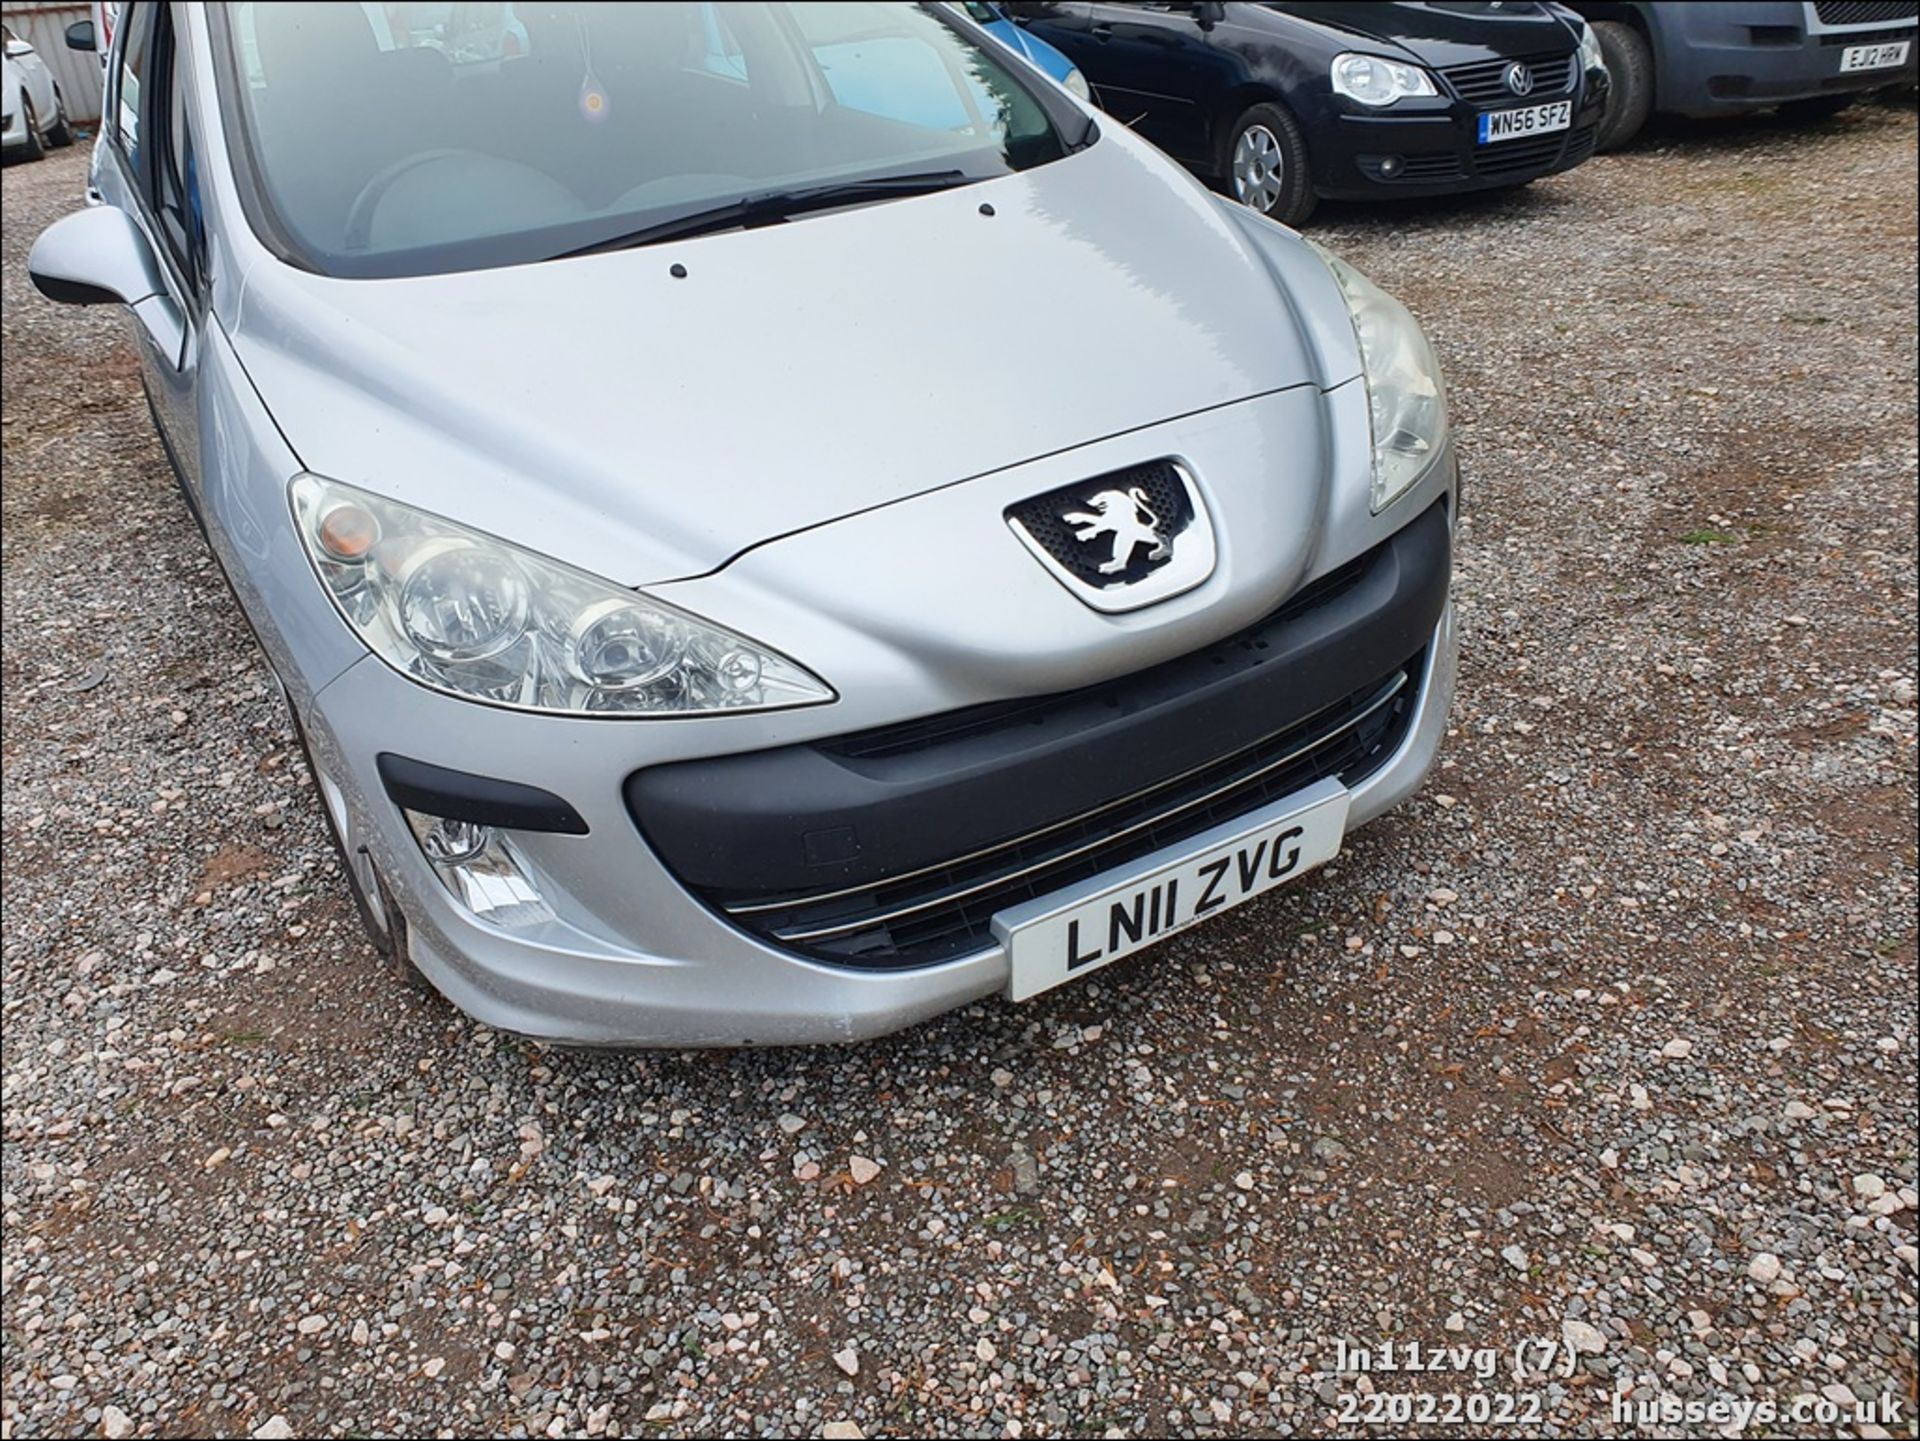 11/11 PEUGEOT 308 S SW HDI 92 - 1560cc 5dr Estate (Silver, 115k) - Image 8 of 46